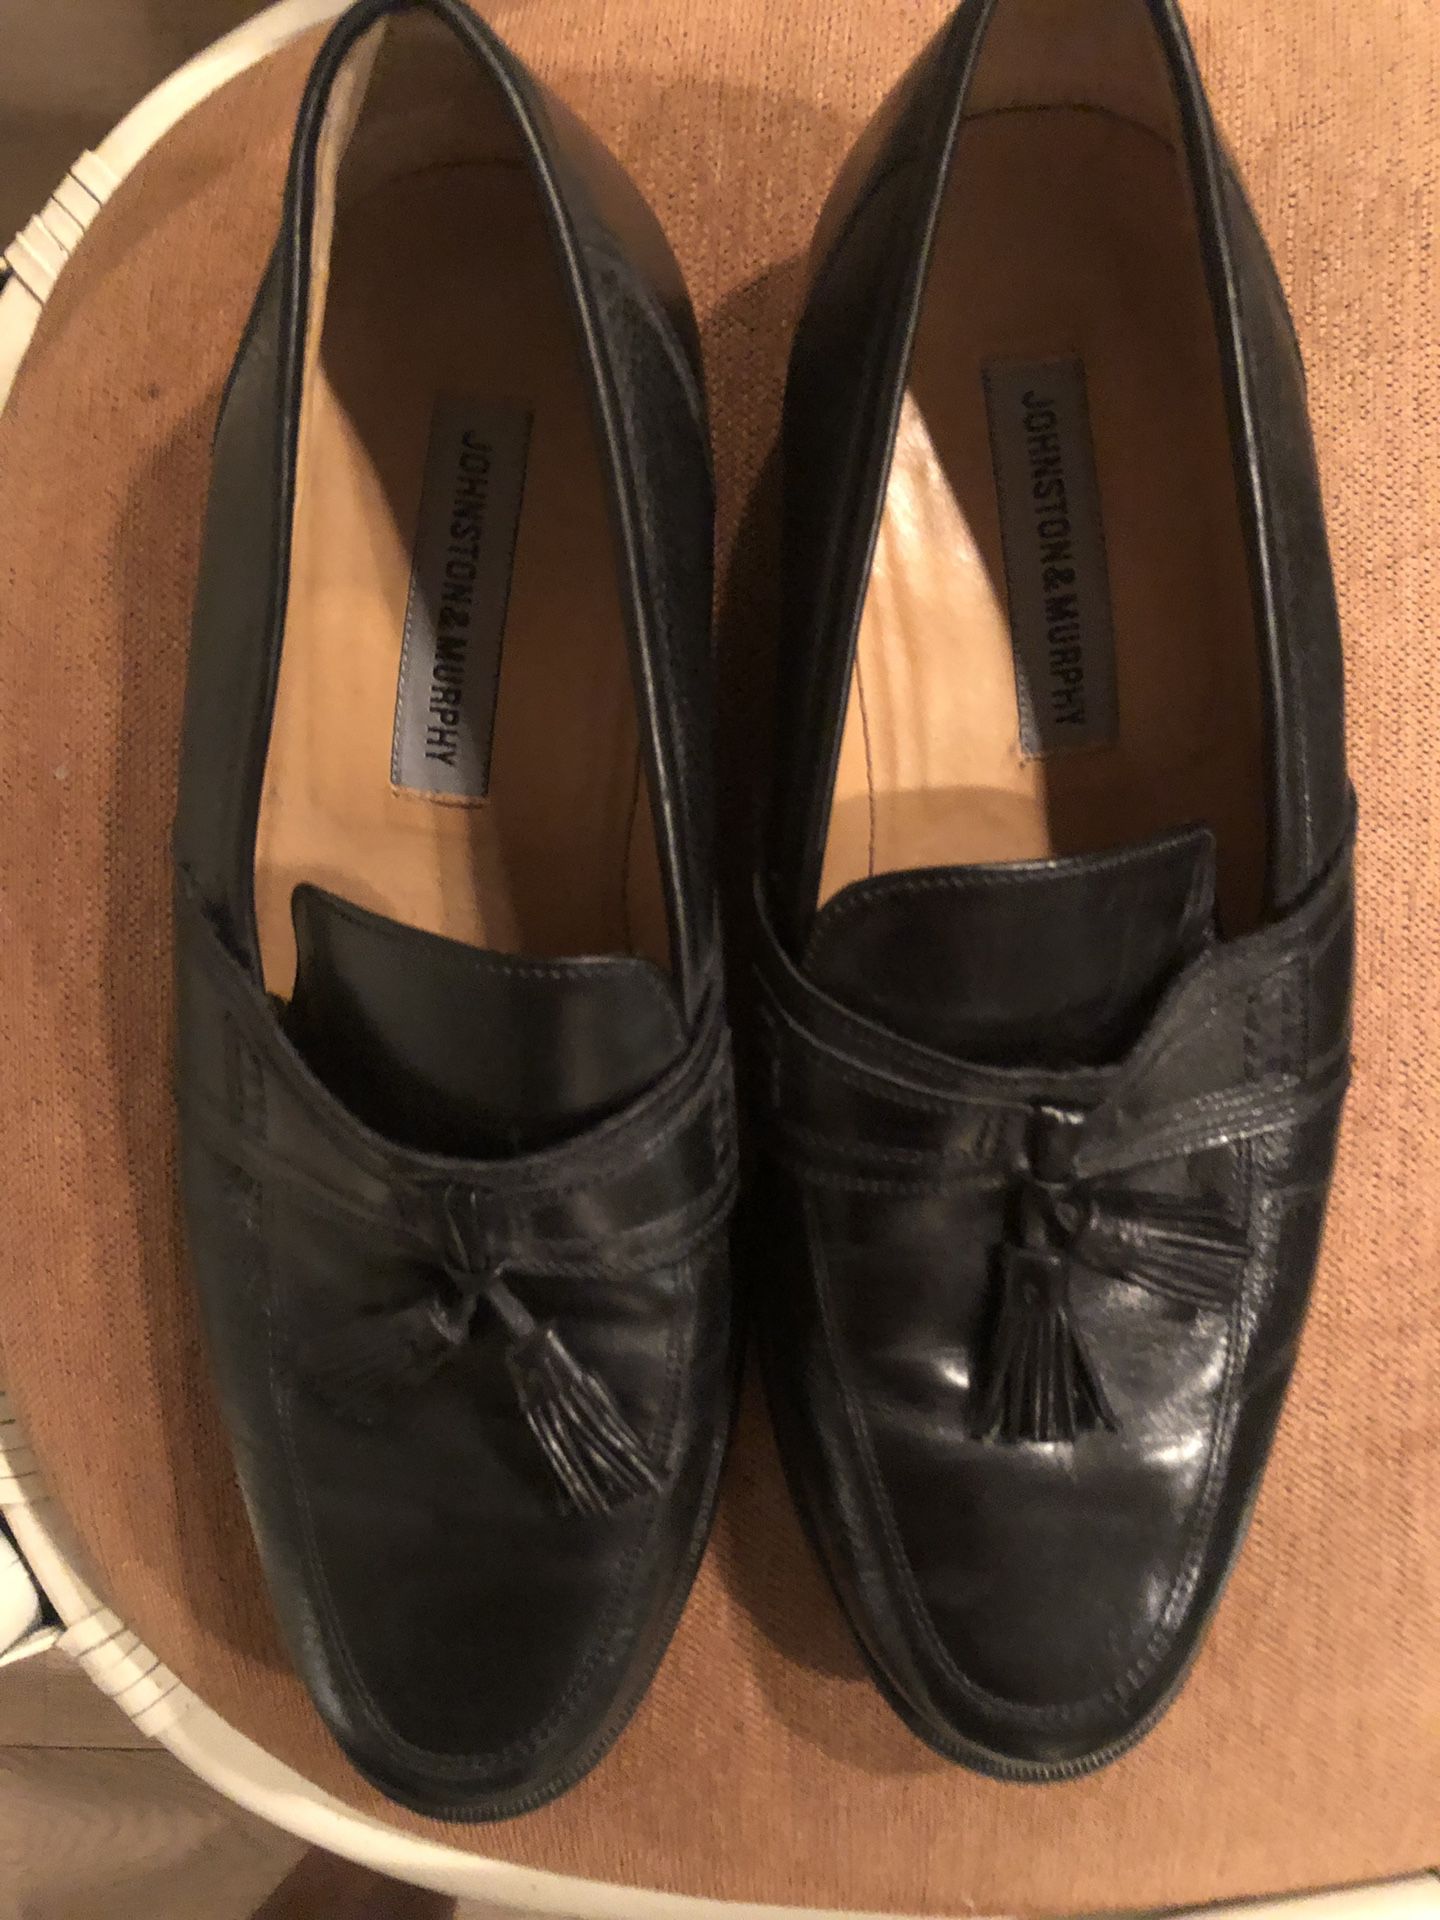 Johnson and Murphy men’s black leather shoes. Used excellent condition